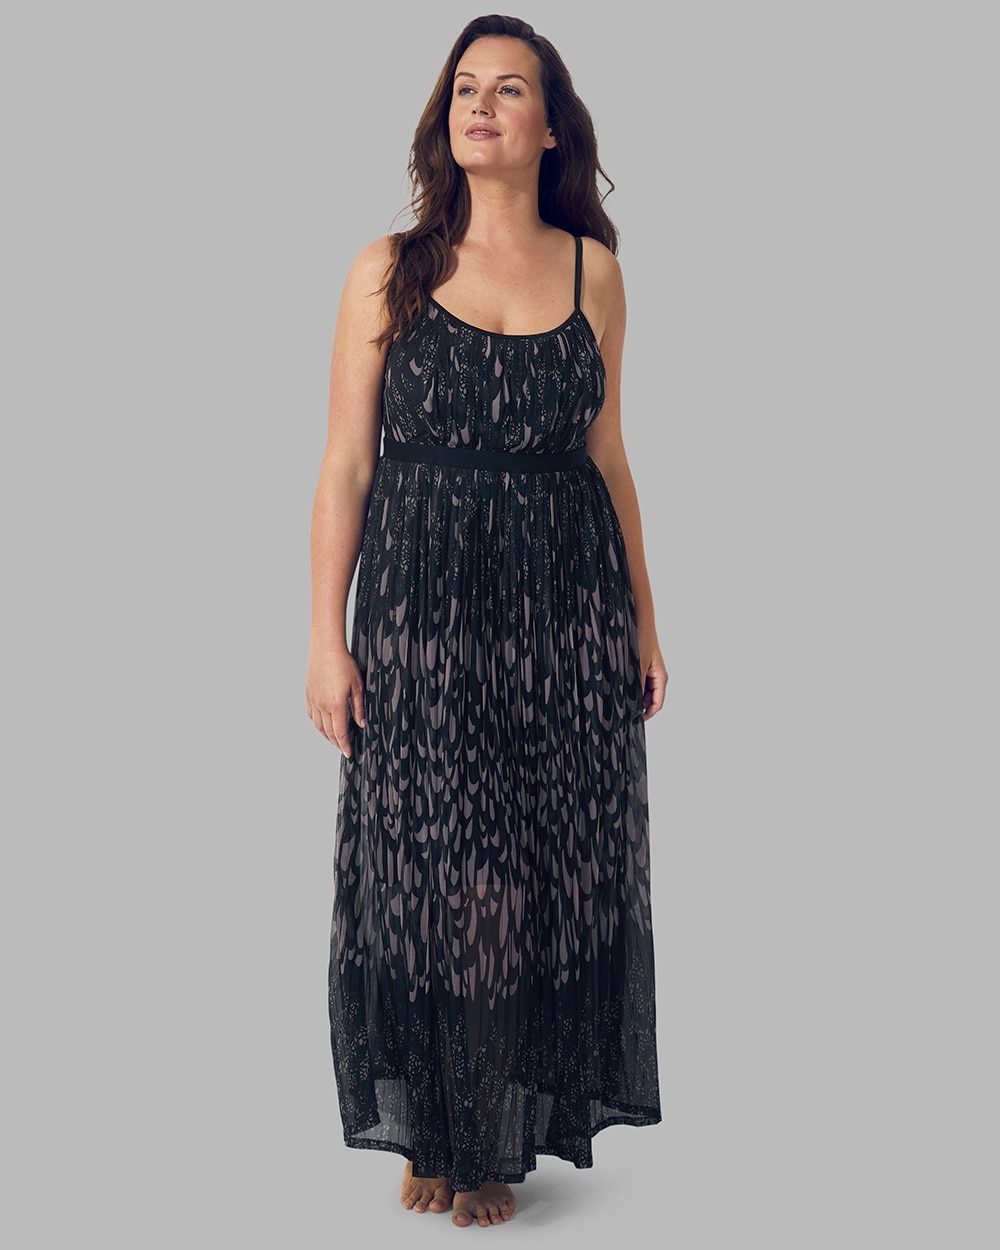 Pleated Mesh Maxi Dress With Built-In Bra